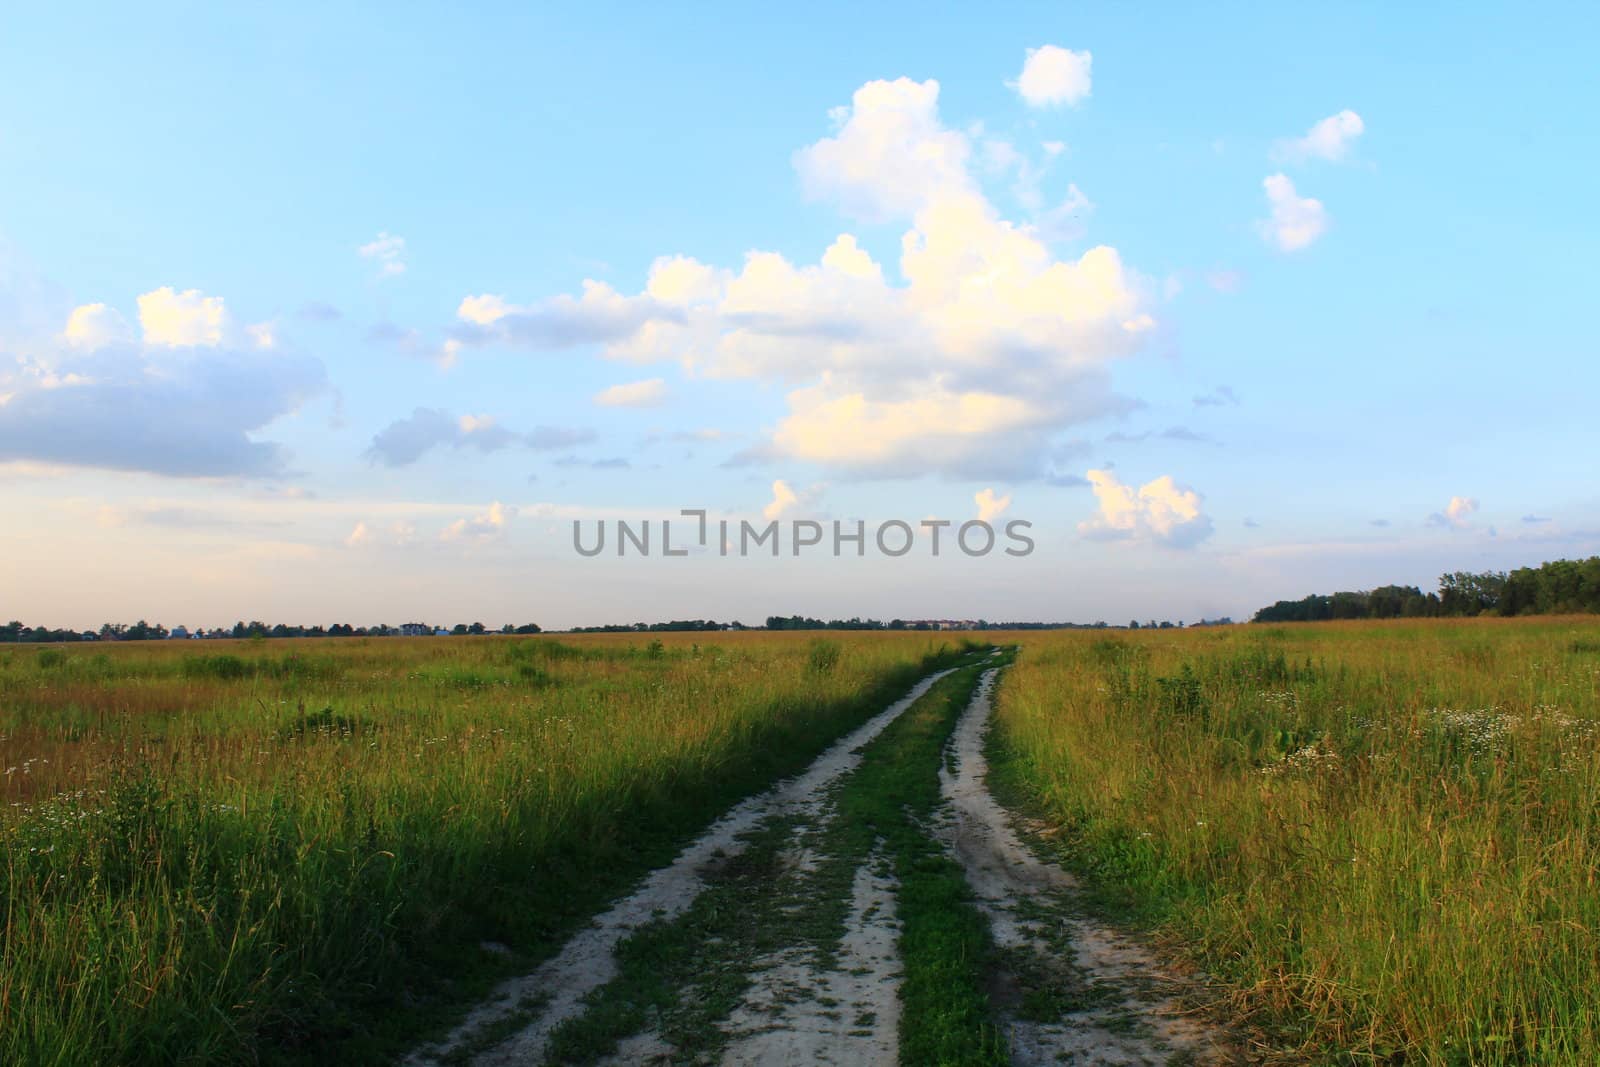 a road leads to the horizon in the field